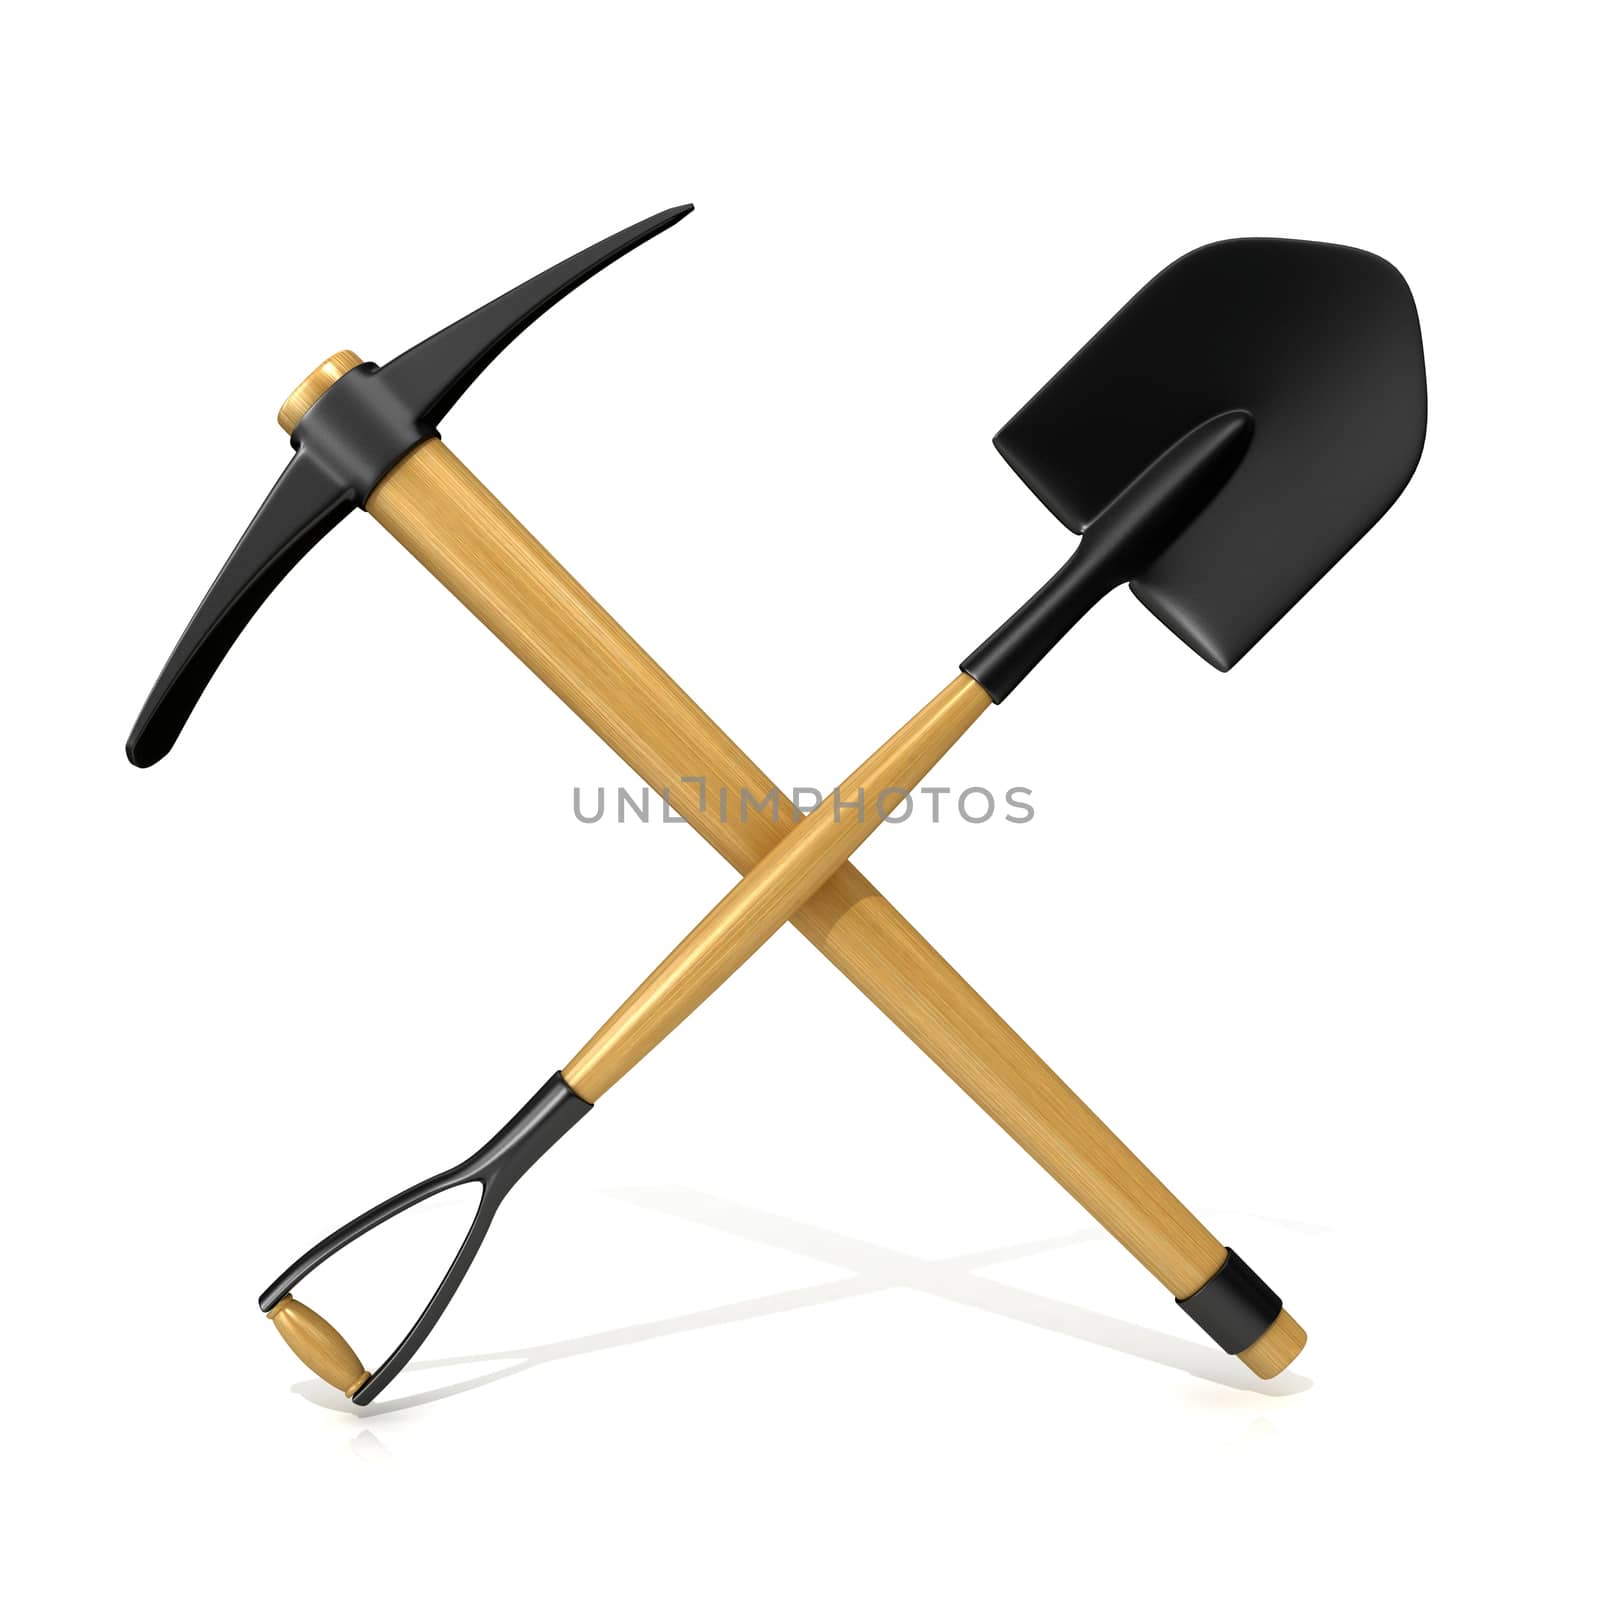 Mining tools, shovel and pickaxe. 3D render illustration, isolated on white background